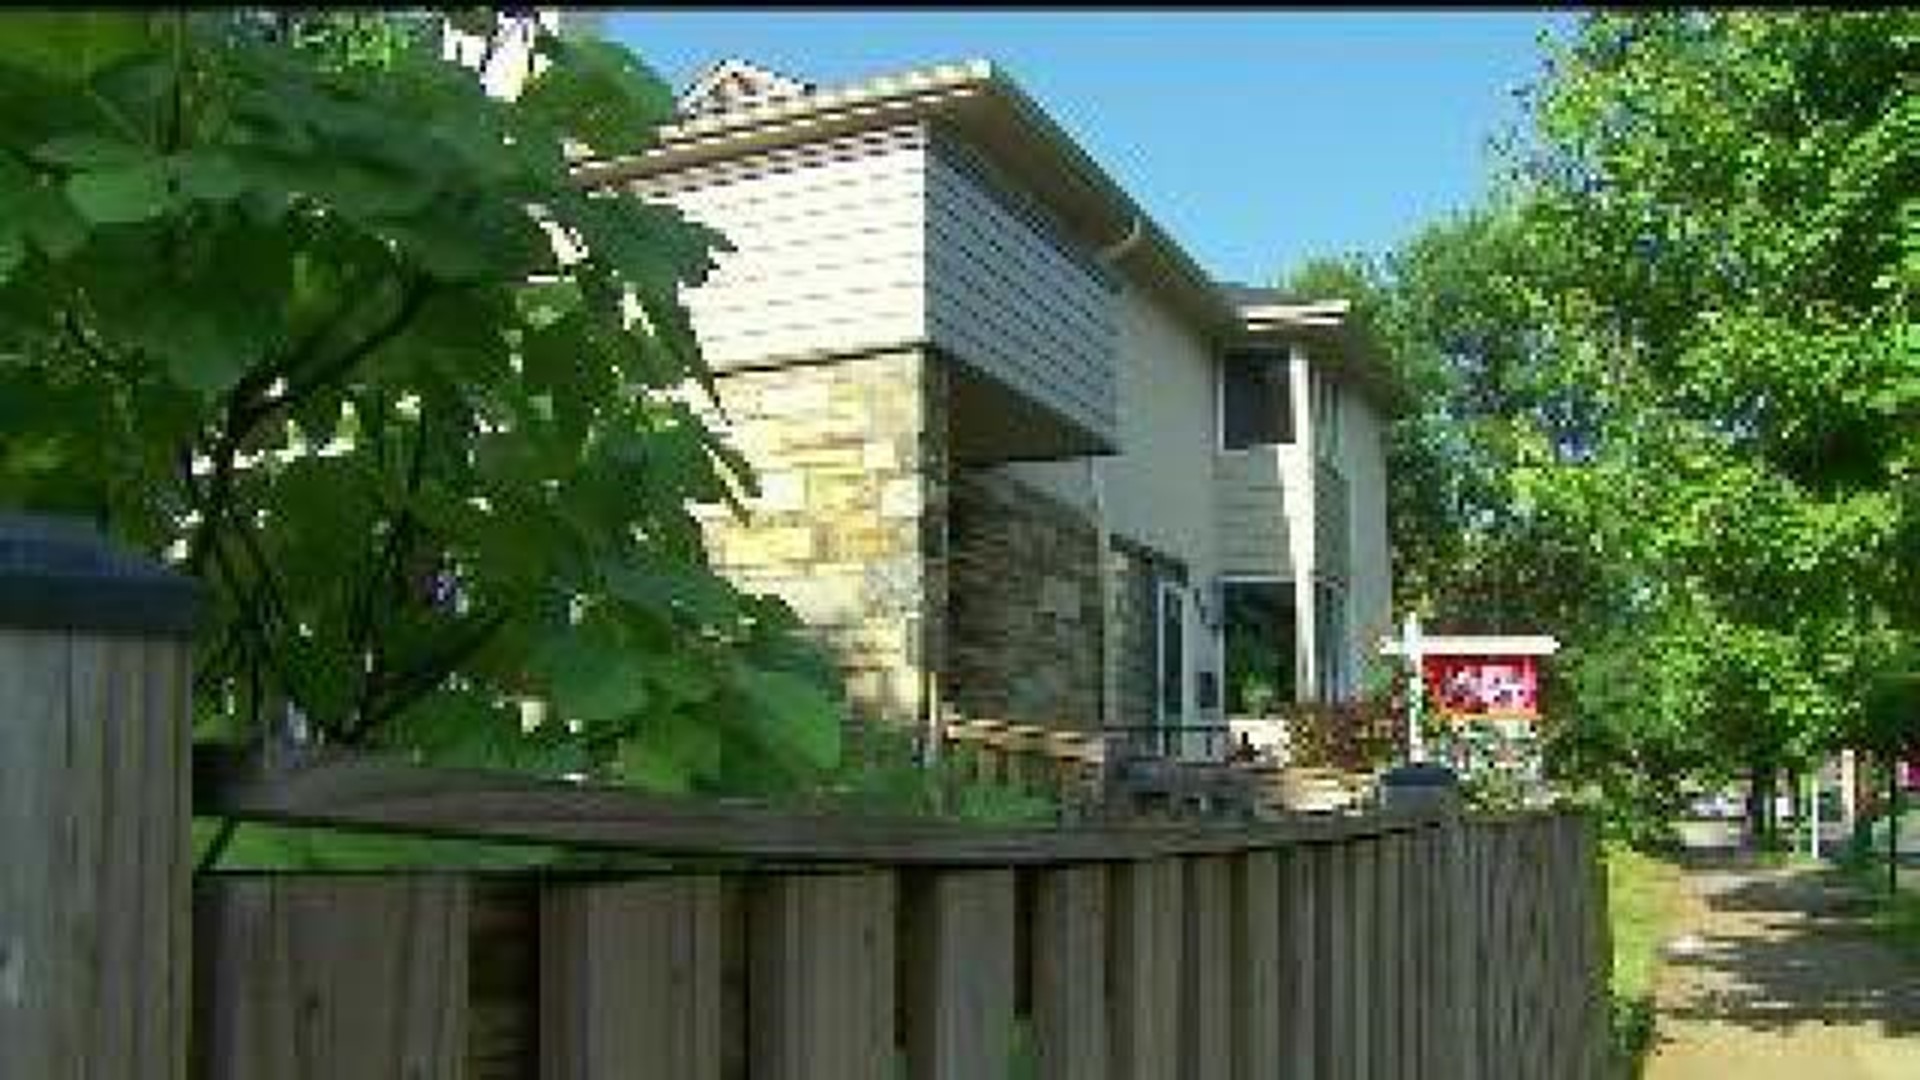 Illinois law helps protect homeowners